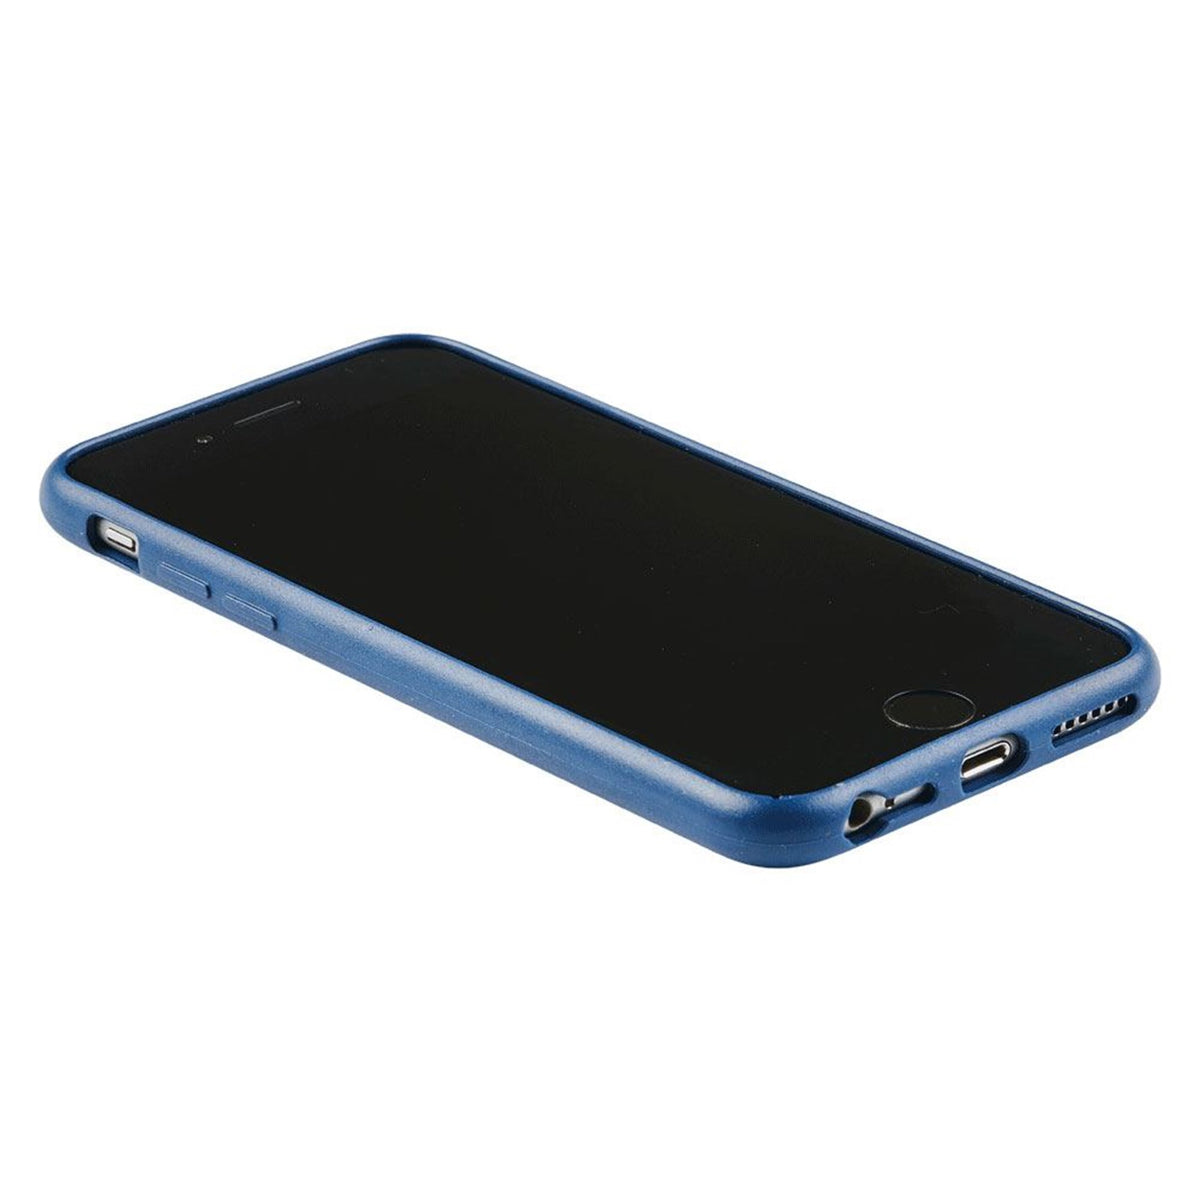 GreyLime-iPhone-6-7-8-Plus-biodegradable-cover-Navy-blue-COIP678P03-V3.jpg